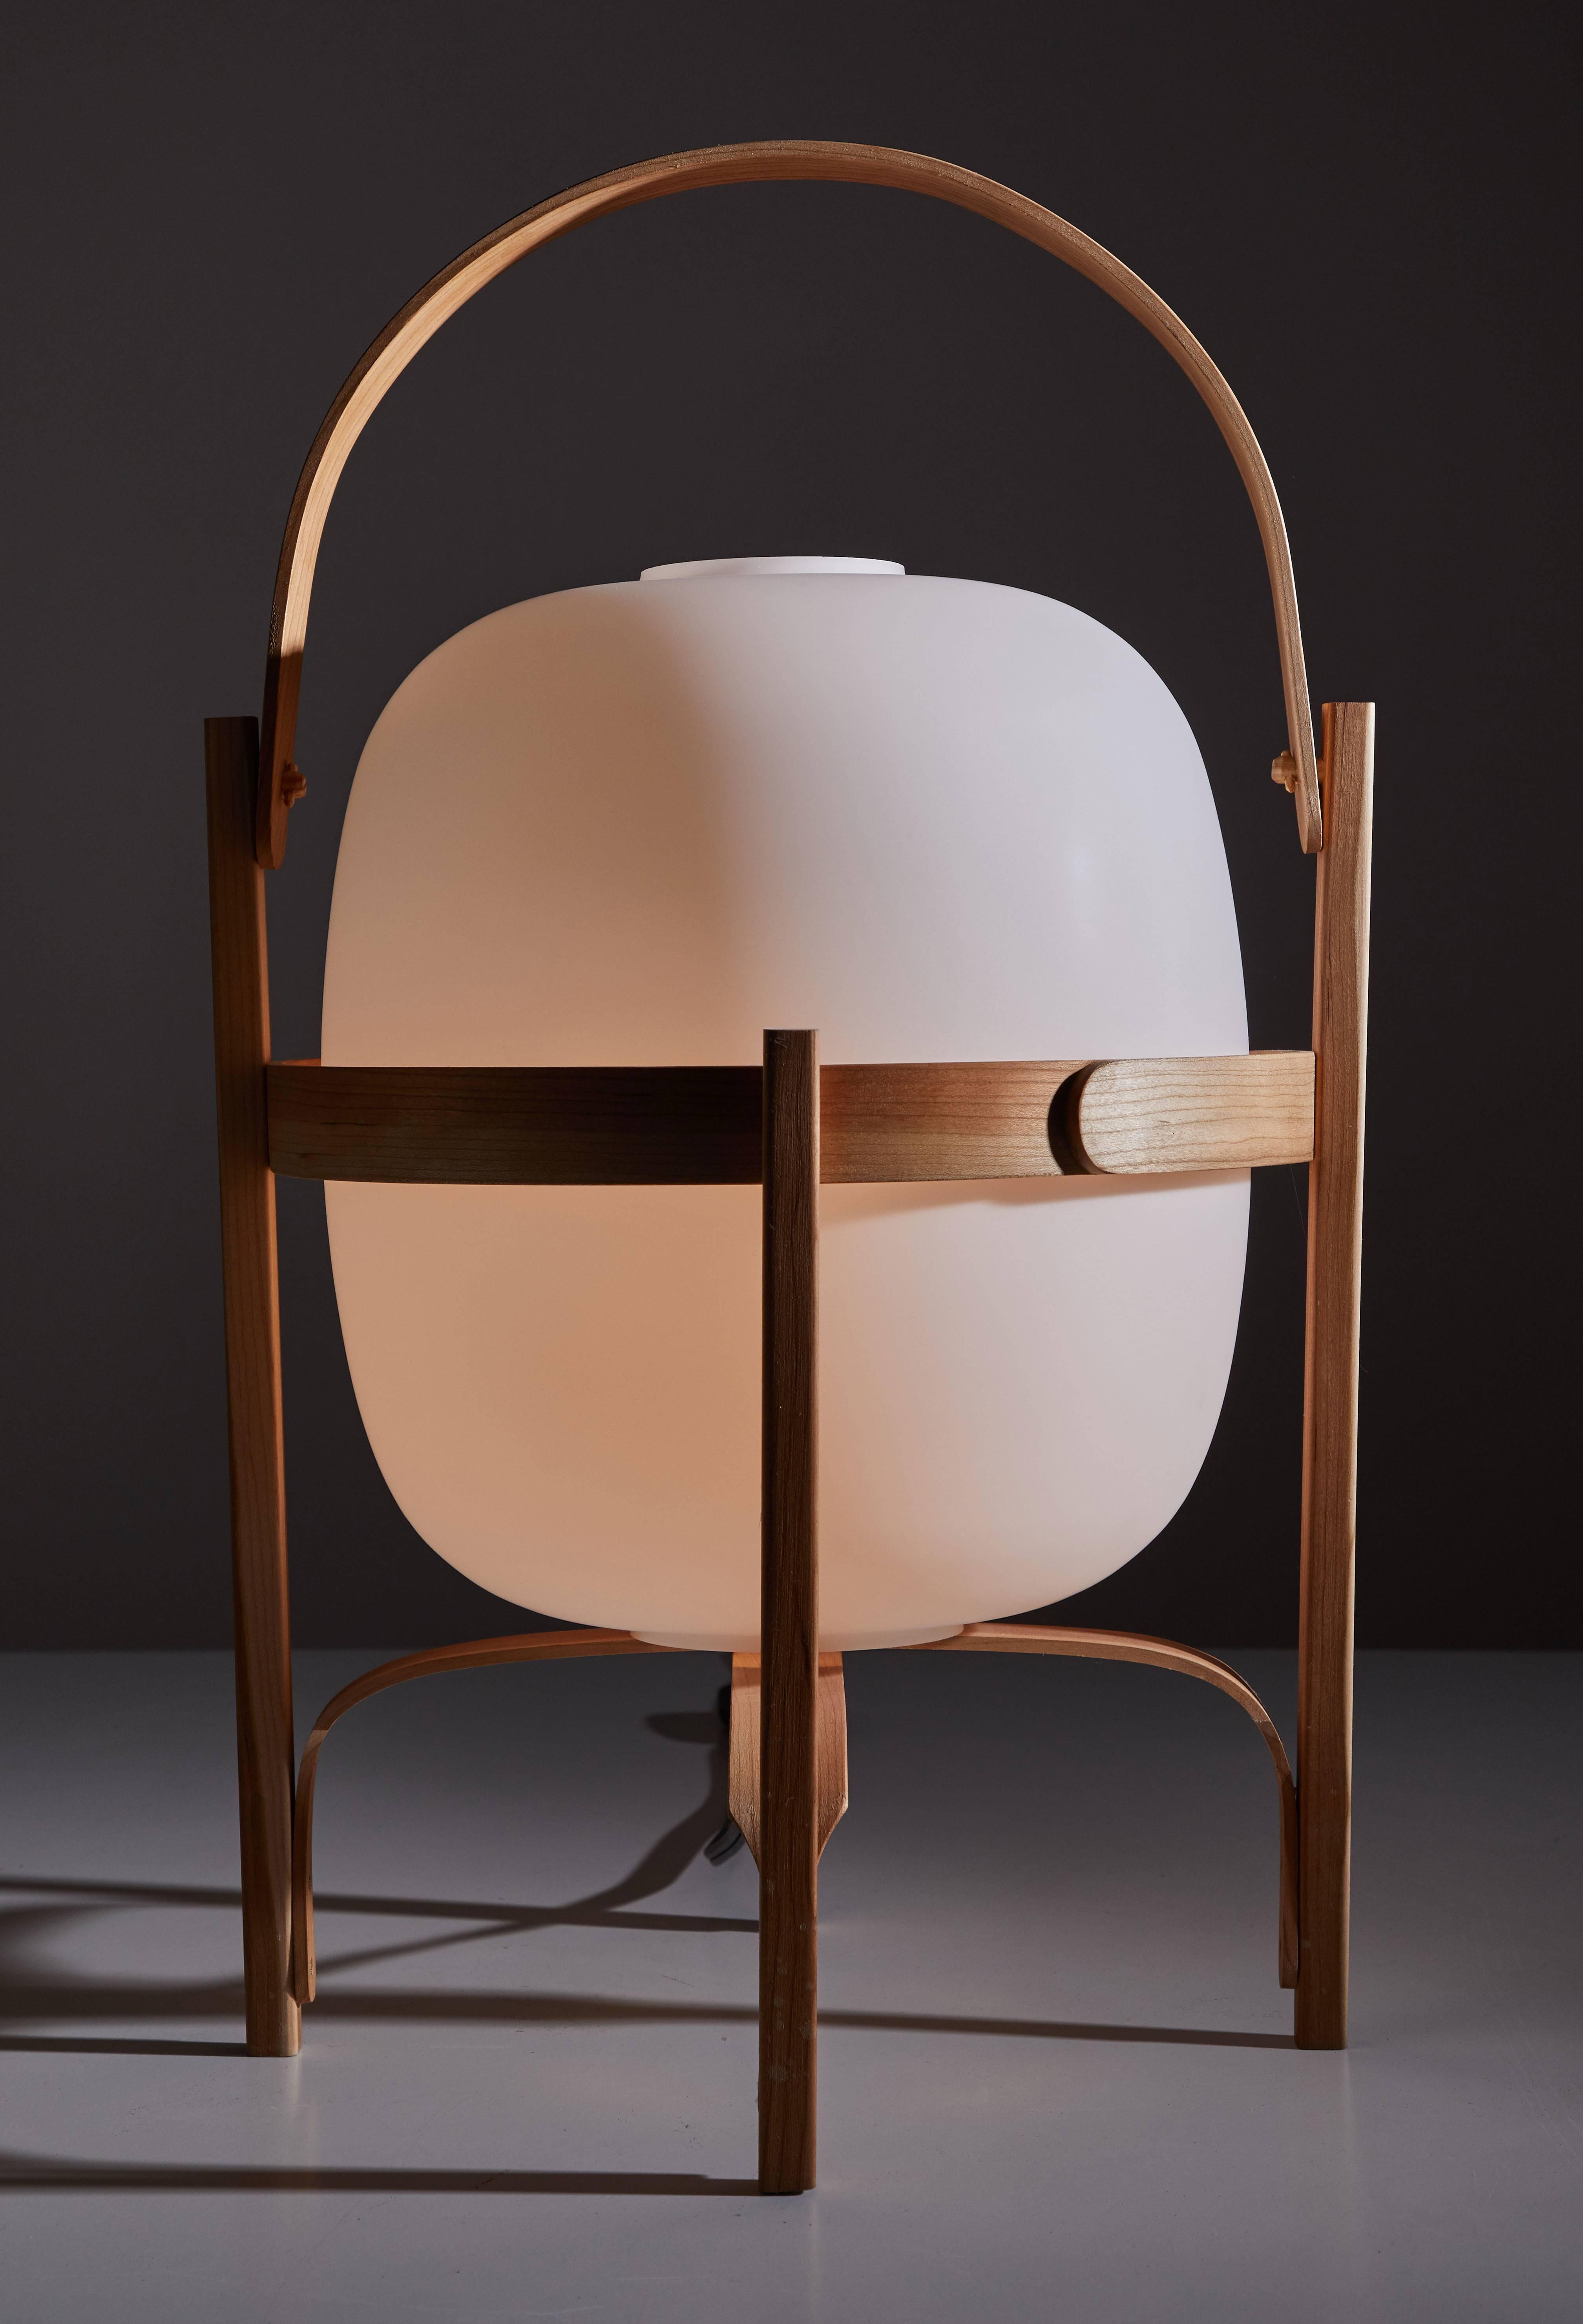 Cesta table lamp by Miguel Mila for Santa and Cole originally manufactured in 1962. This re-edition is a handcrafted lamp that has been shaped using traditional steam bending techniques and is delicately polished and sturdily put together. It